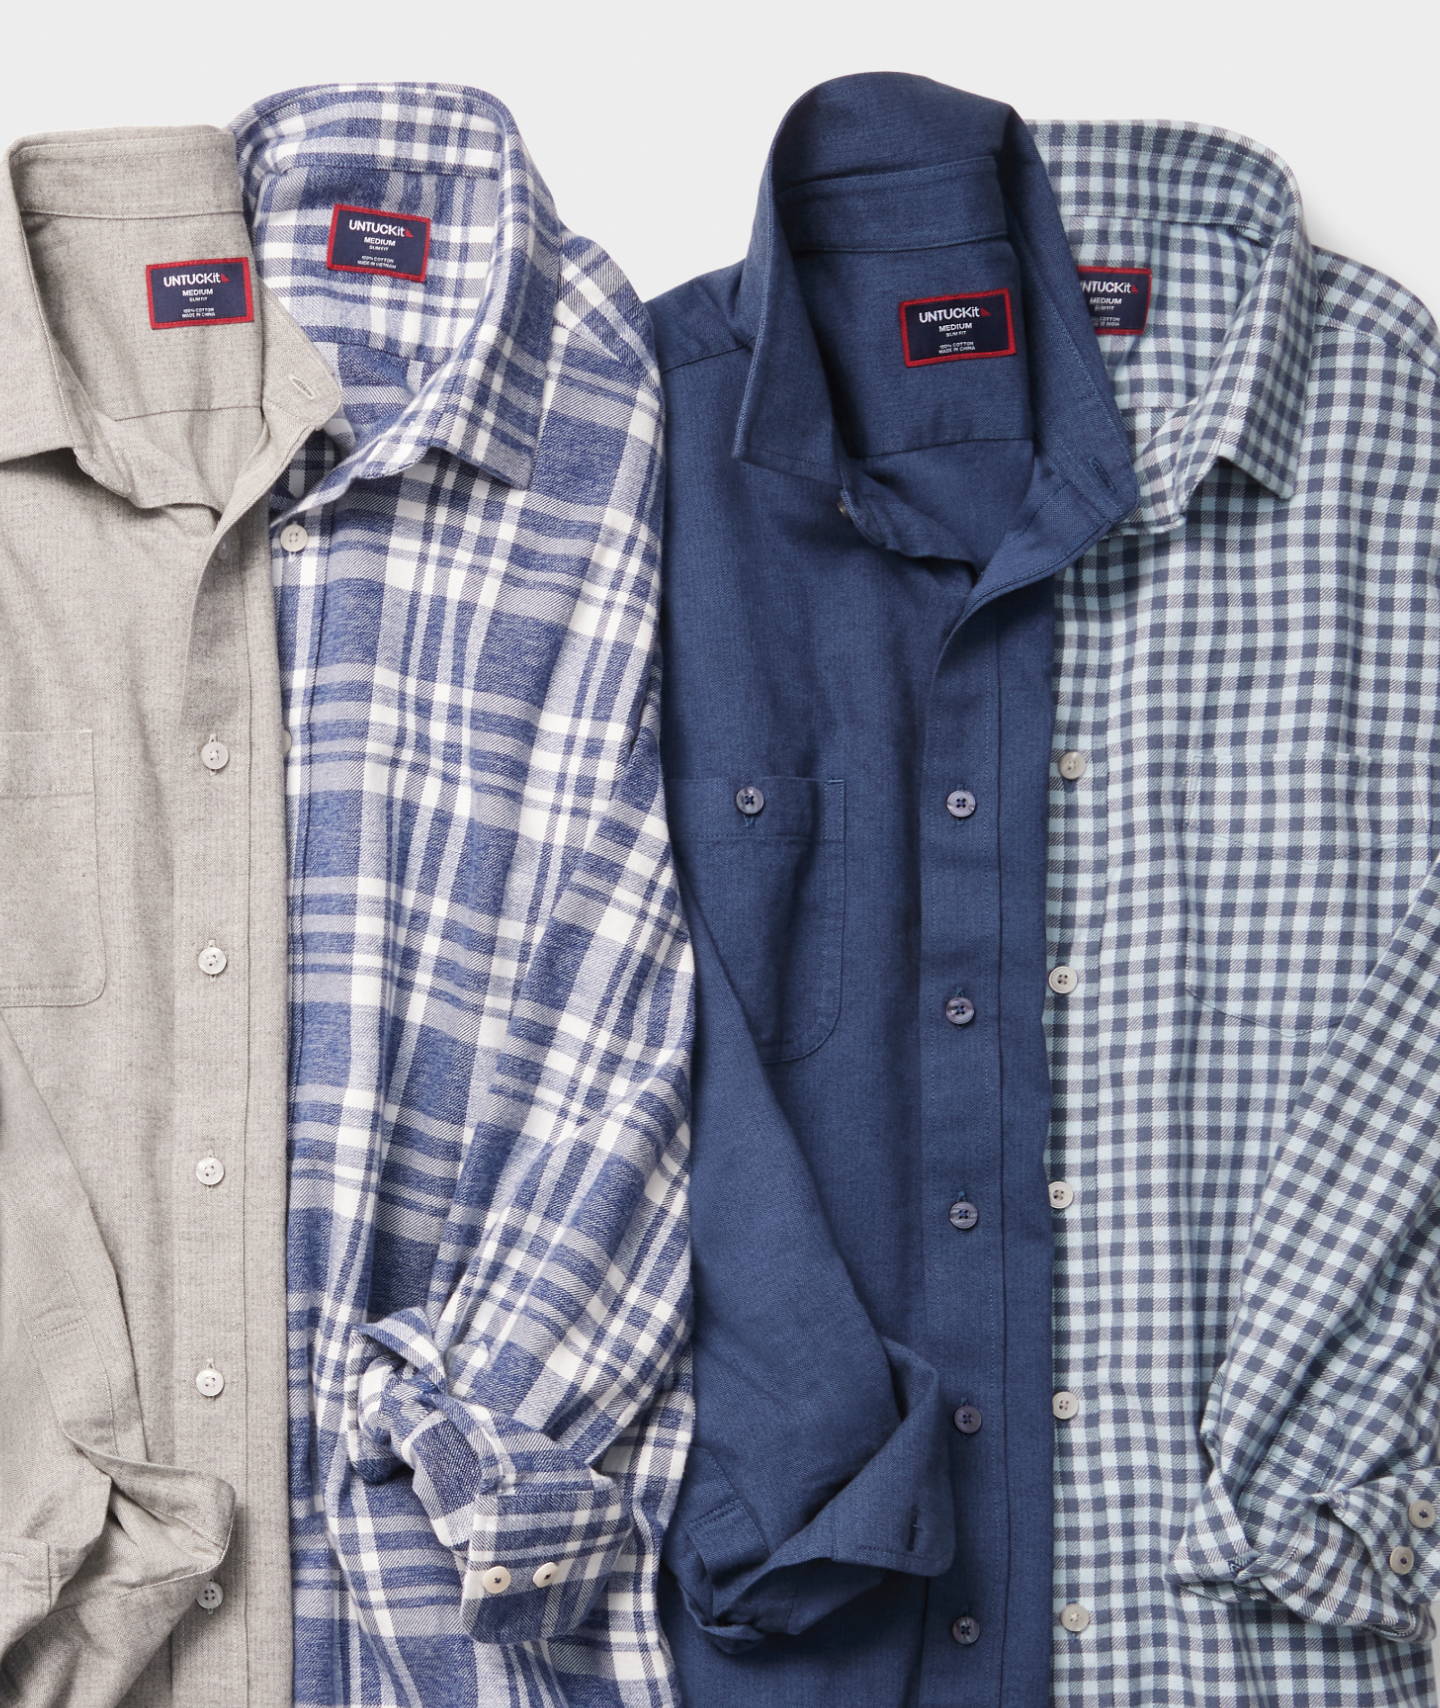 Collection of UNTUCKit Flannel's in various colors and patters, 